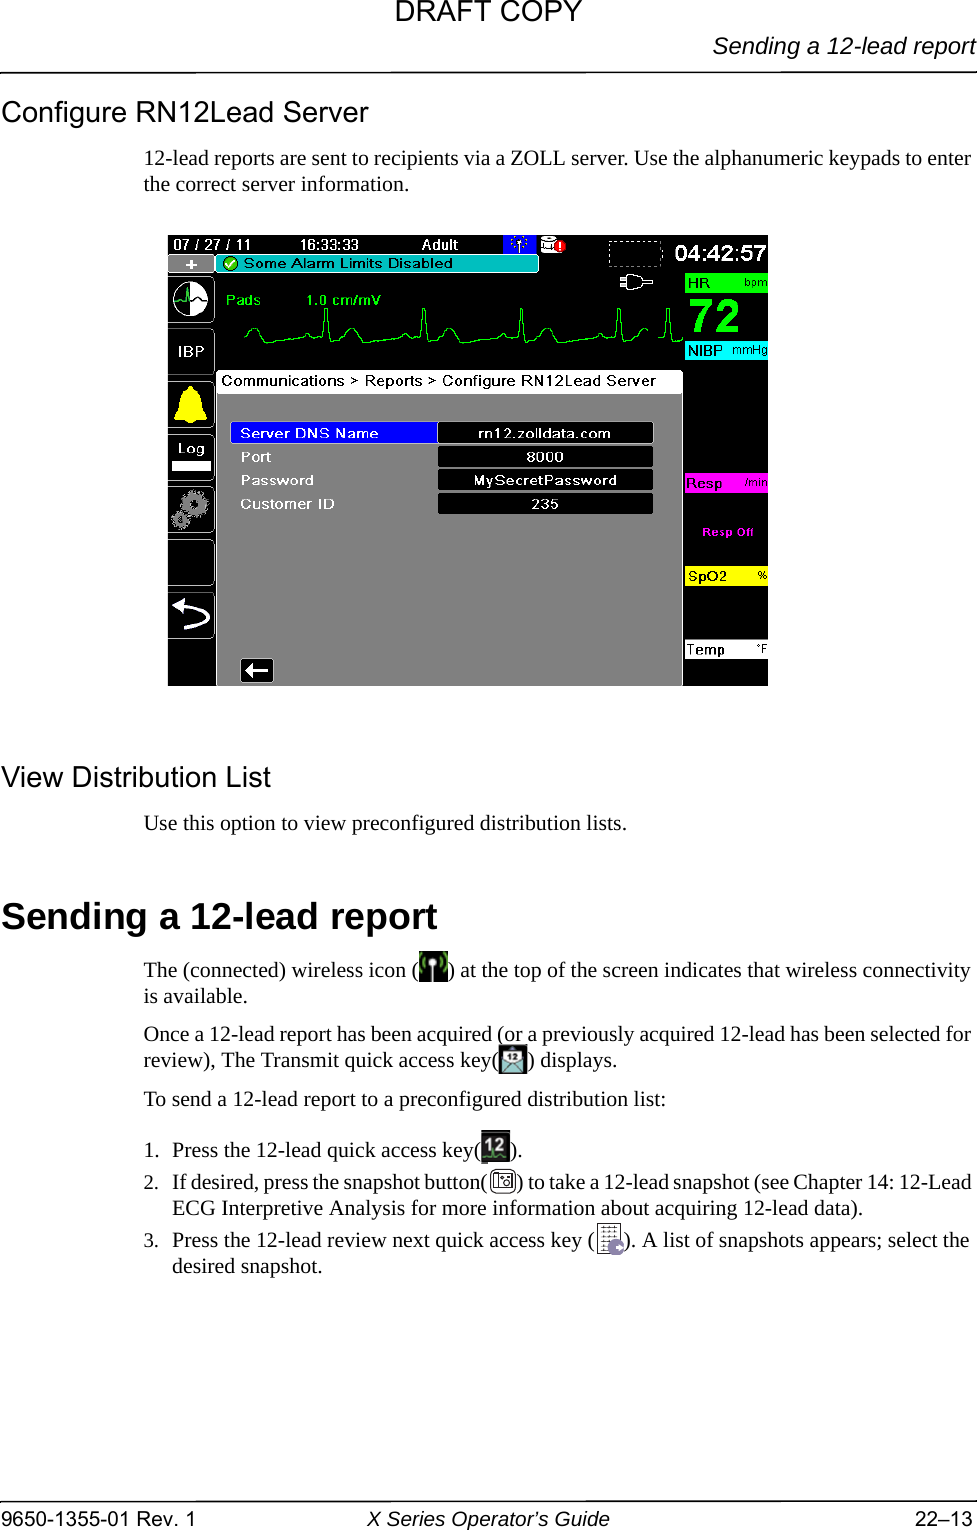 Sending a 12-lead report9650-1355-01 Rev. 1 X Series Operator’s Guide 22–13Configure RN12Lead Server12-lead reports are sent to recipients via a ZOLL server. Use the alphanumeric keypads to enter the correct server information.View Distribution ListUse this option to view preconfigured distribution lists. Sending a 12-lead reportThe (connected) wireless icon ( ) at the top of the screen indicates that wireless connectivity is available.Once a 12-lead report has been acquired (or a previously acquired 12-lead has been selected for review), The Transmit quick access key( ) displays.To send a 12-lead report to a preconfigured distribution list:1. Press the 12-lead quick access key( ).2. If desired, press the snapshot button( ) to take a 12-lead snapshot (see Chapter 14: 12-Lead ECG Interpretive Analysis for more information about acquiring 12-lead data).3. Press the 12-lead review next quick access key ( ). A list of snapshots appears; select the desired snapshot.DRAFT COPY